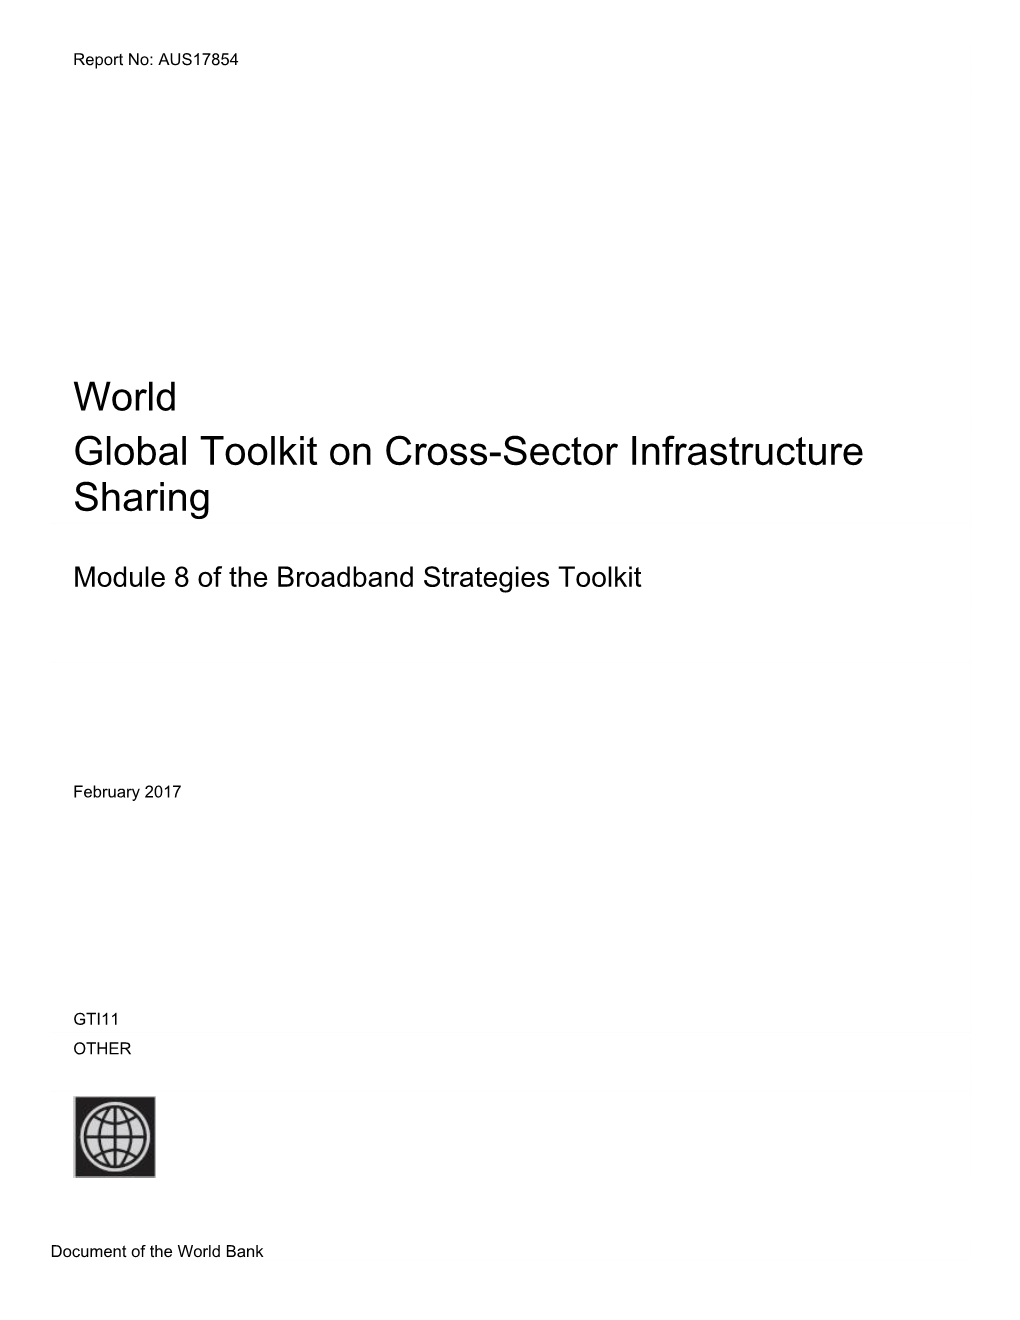 World Global Toolkit on Cross-Sector Infrastructure Sharing